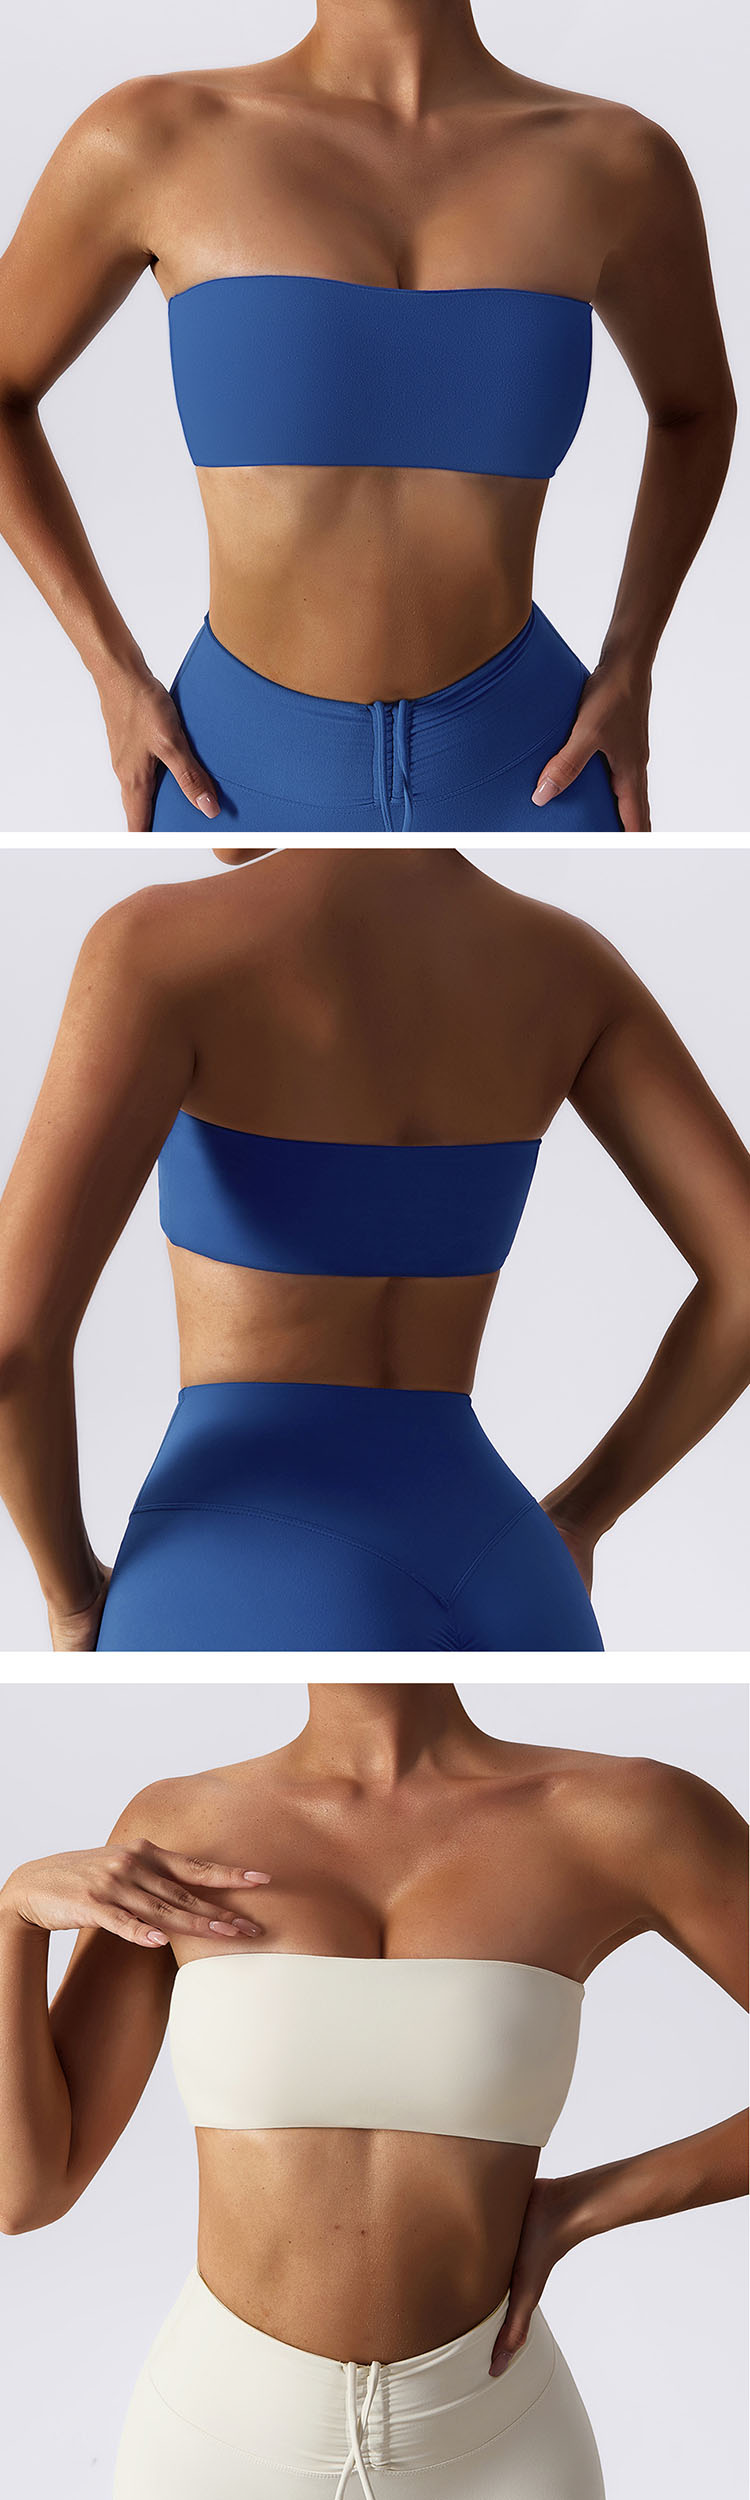 Strapless tube top design is adopted to avoid wearing underwear and enjoy sports